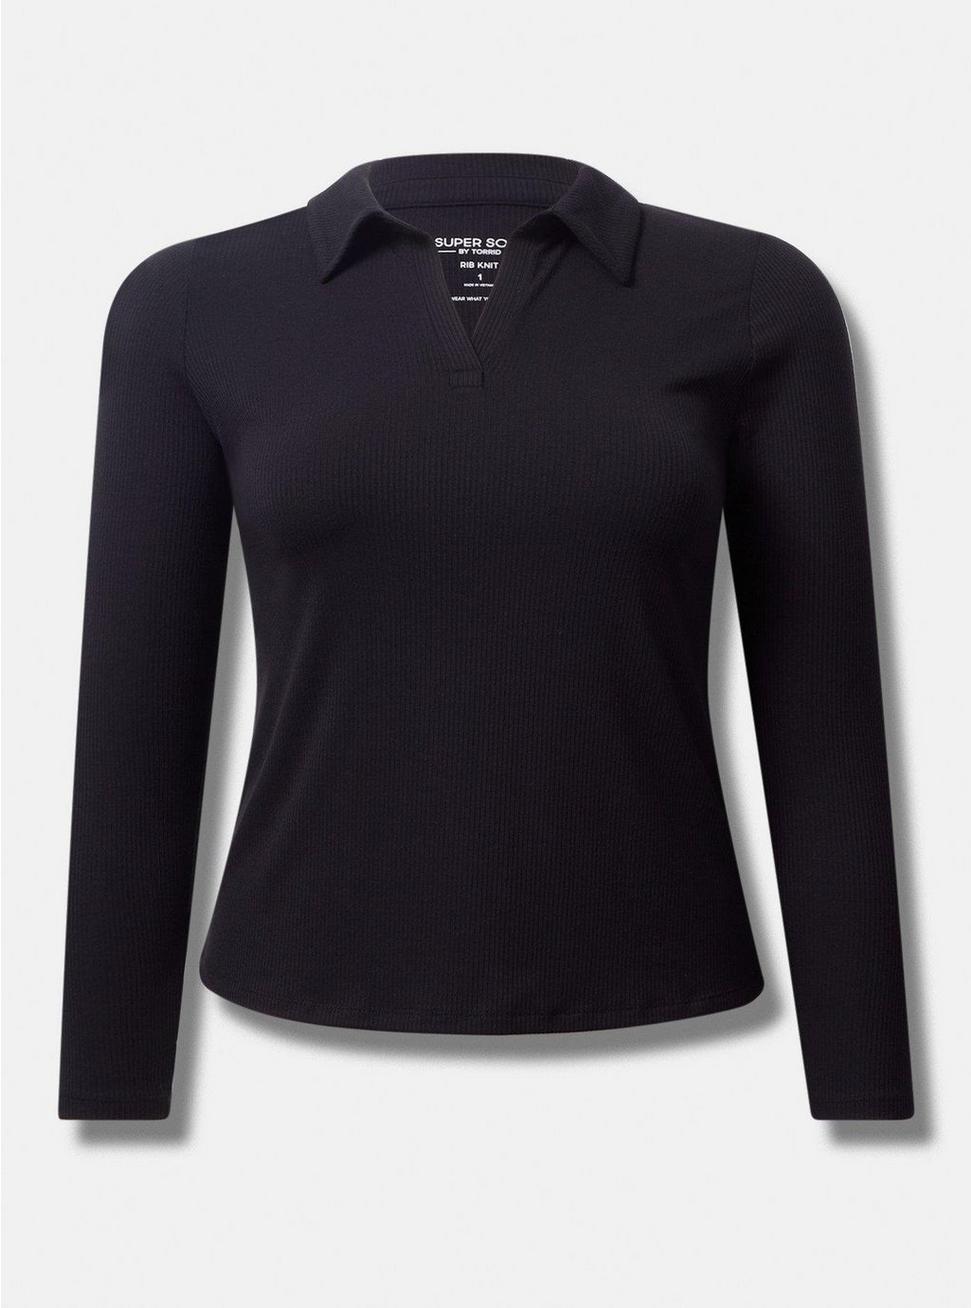 Fitted Super Soft Rib Collared V-Neck Long Sleeve Tee, DEEP BLACK, hi-res